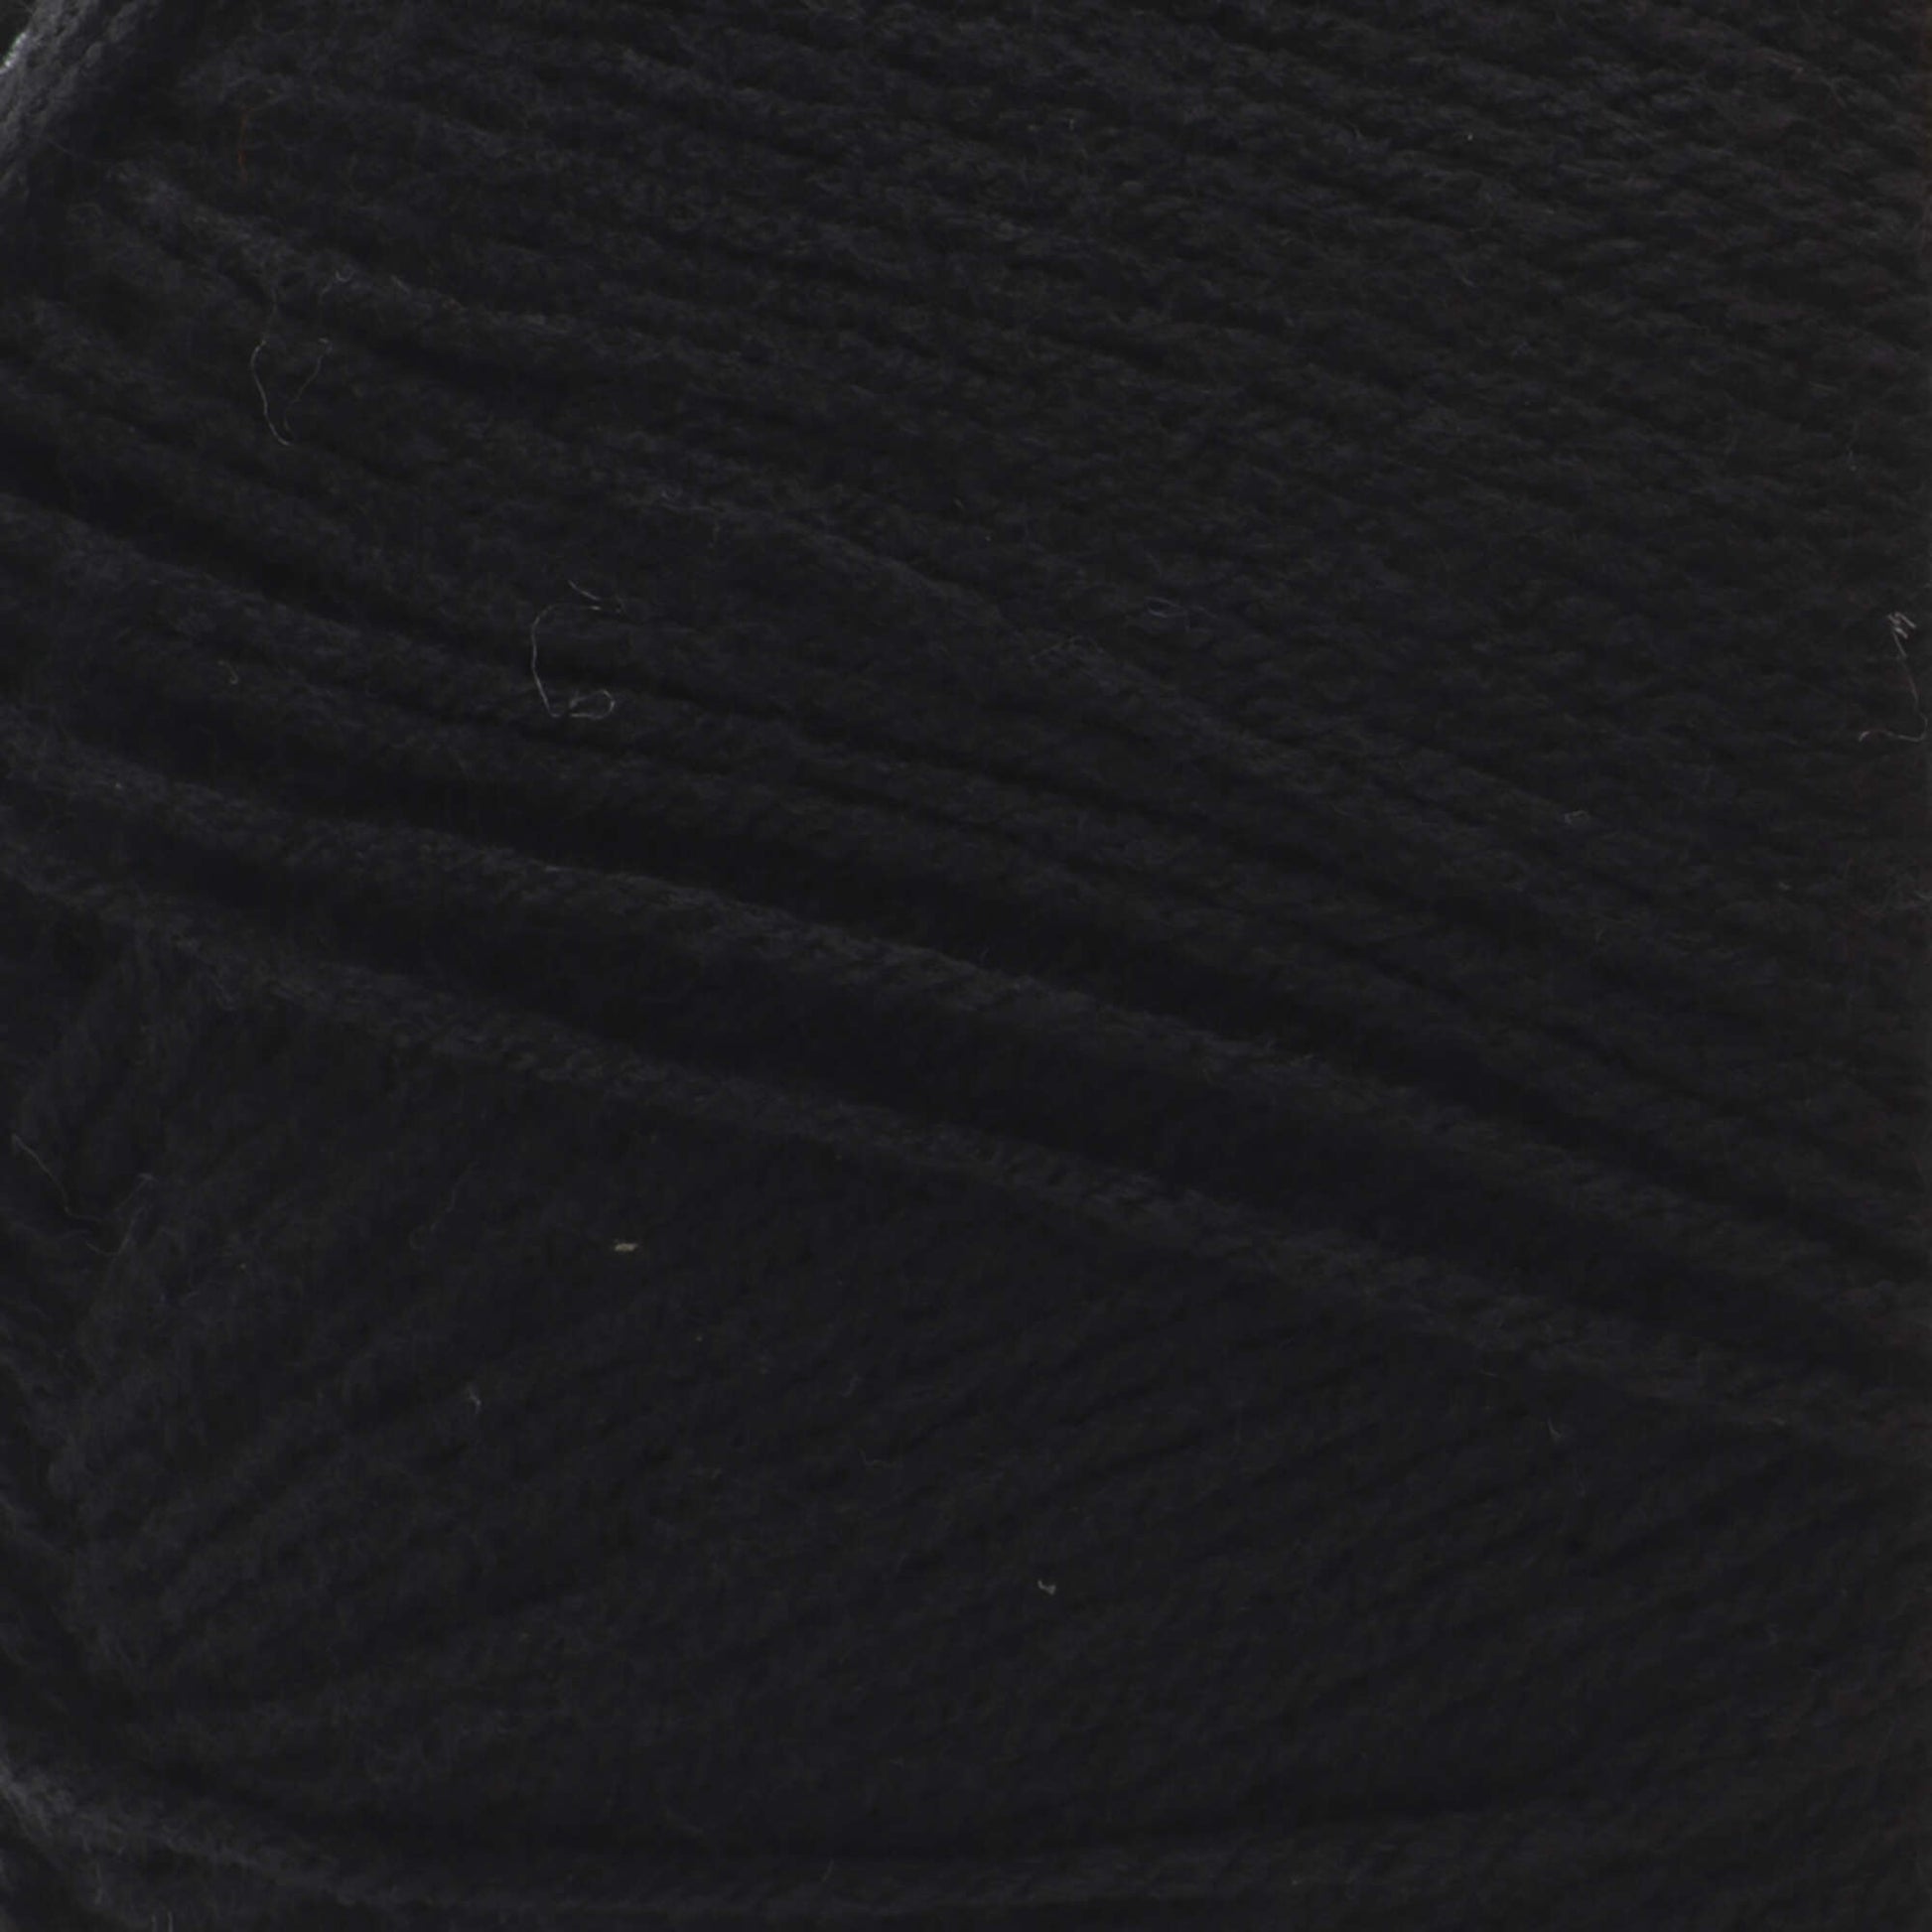 Red Heart Bunches of Hugs Yarn - Discontinued shades